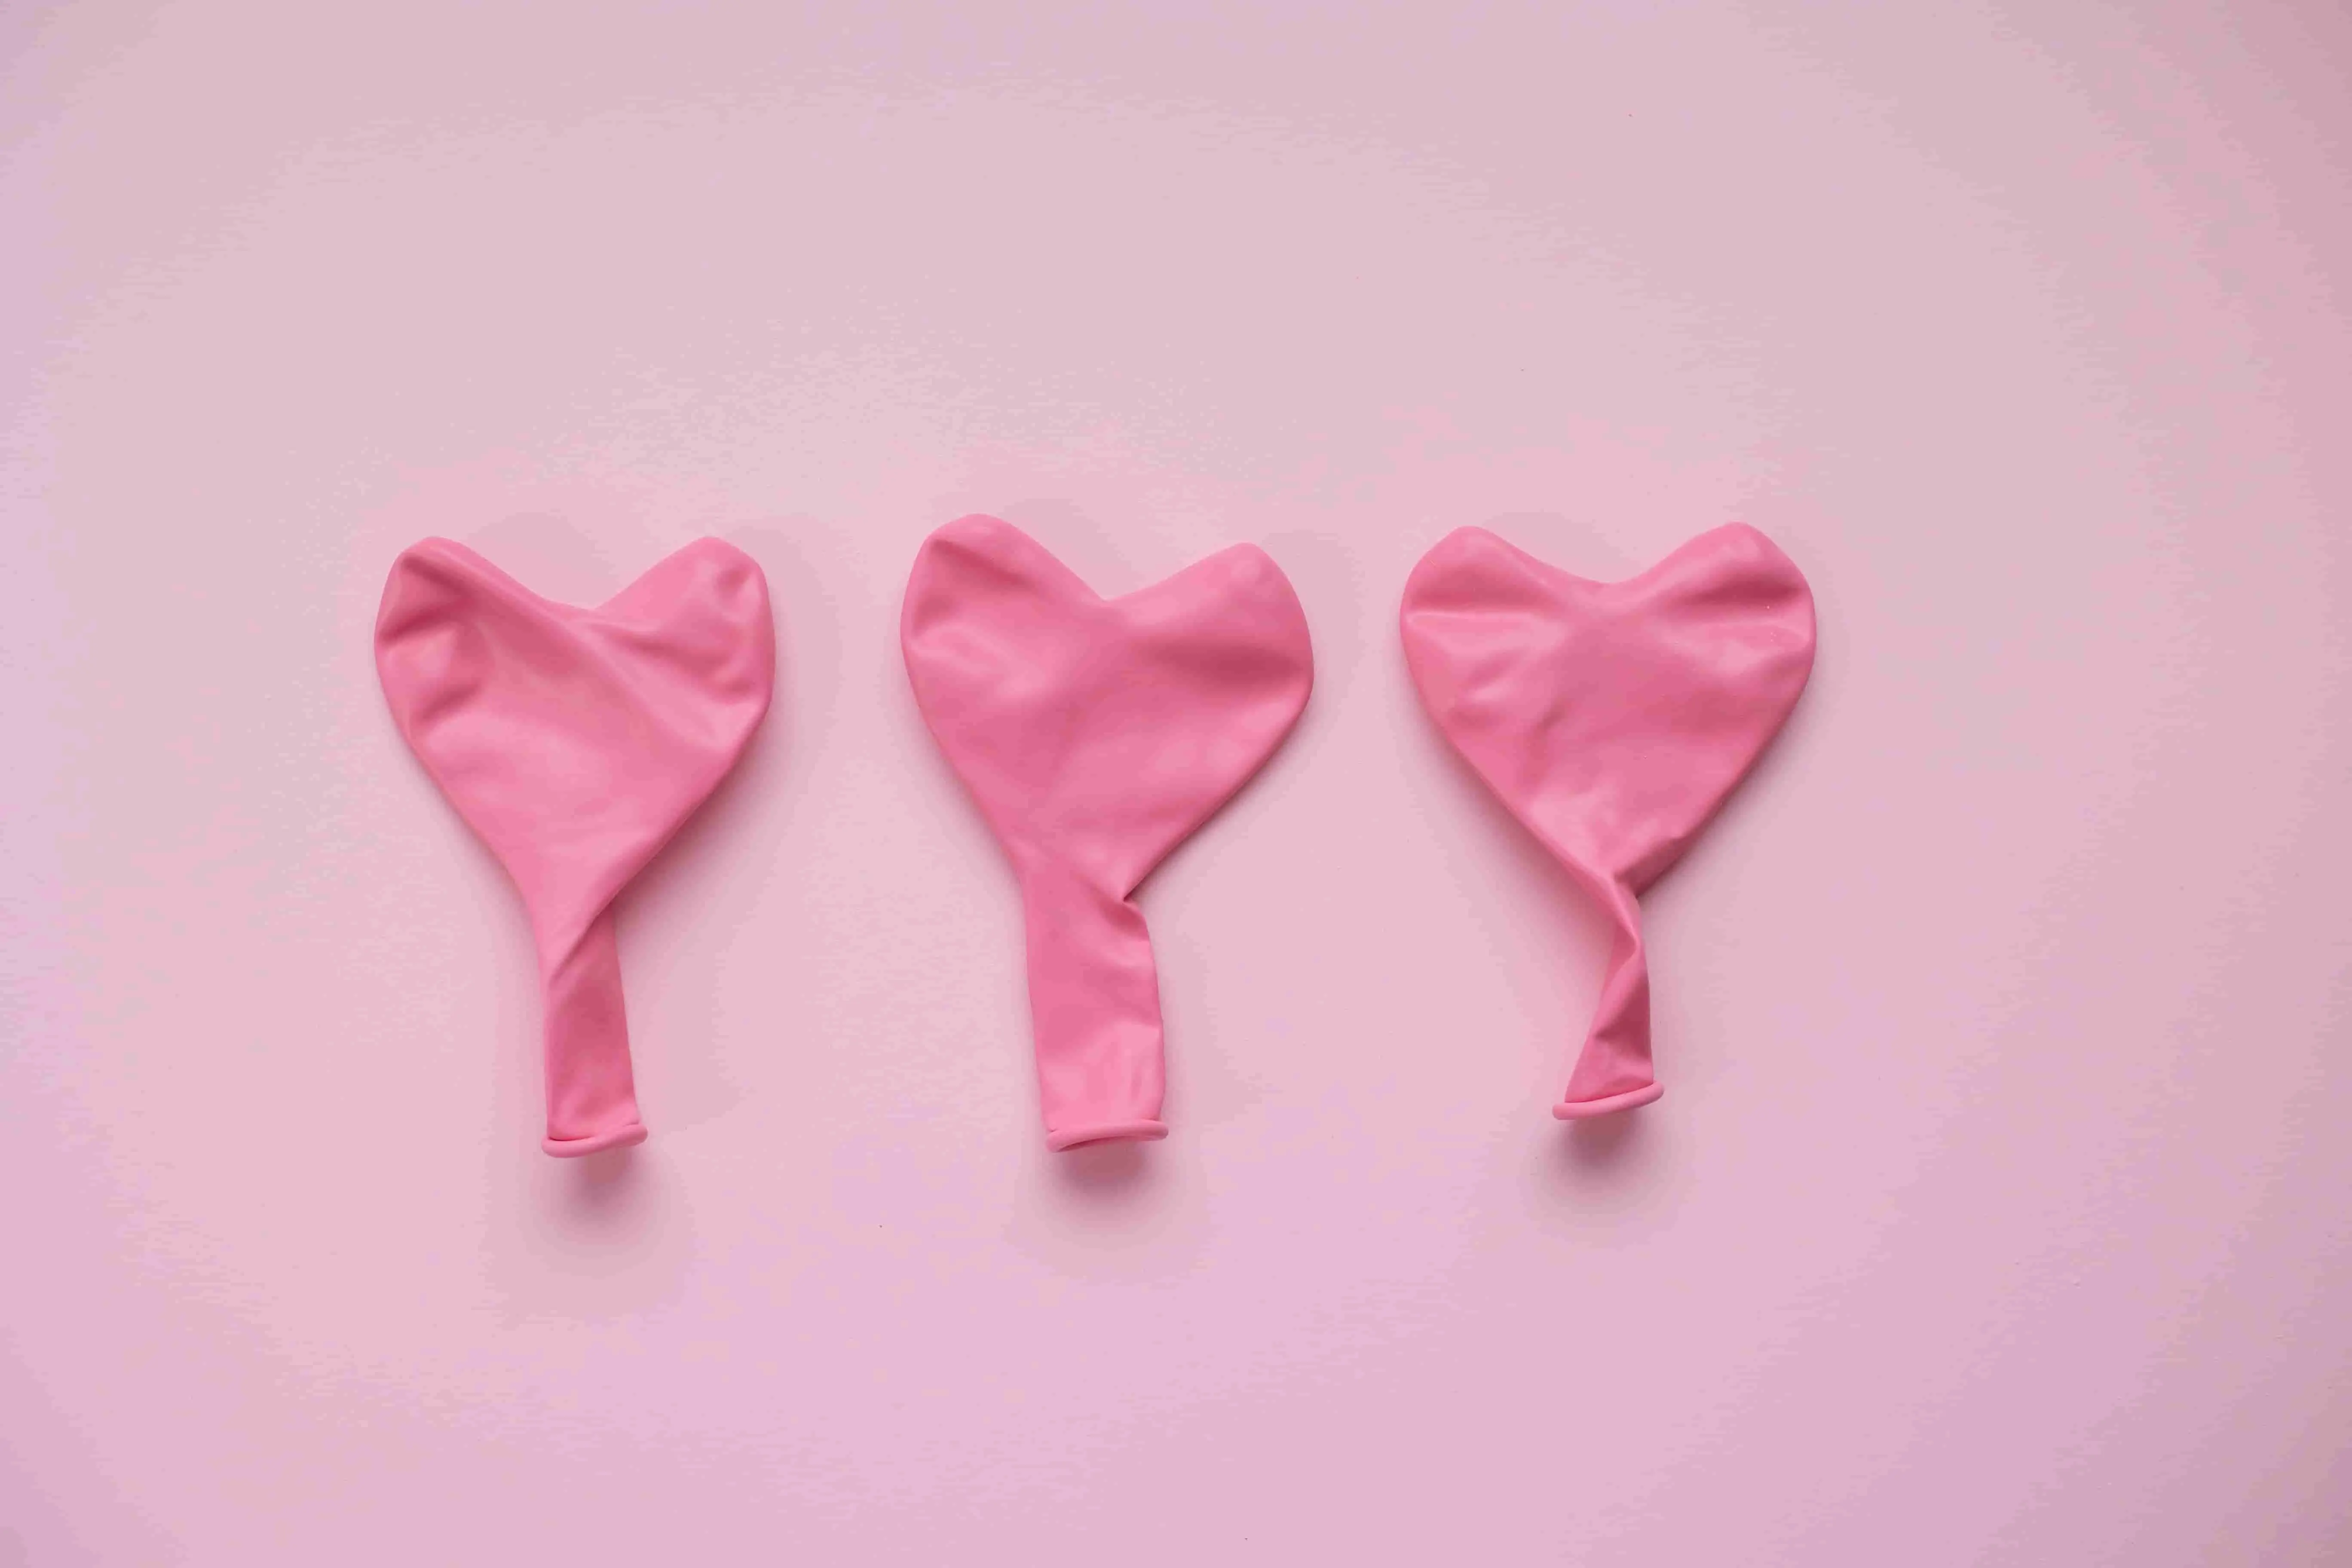 Image of 3 deflated pink balloons against a light pink background